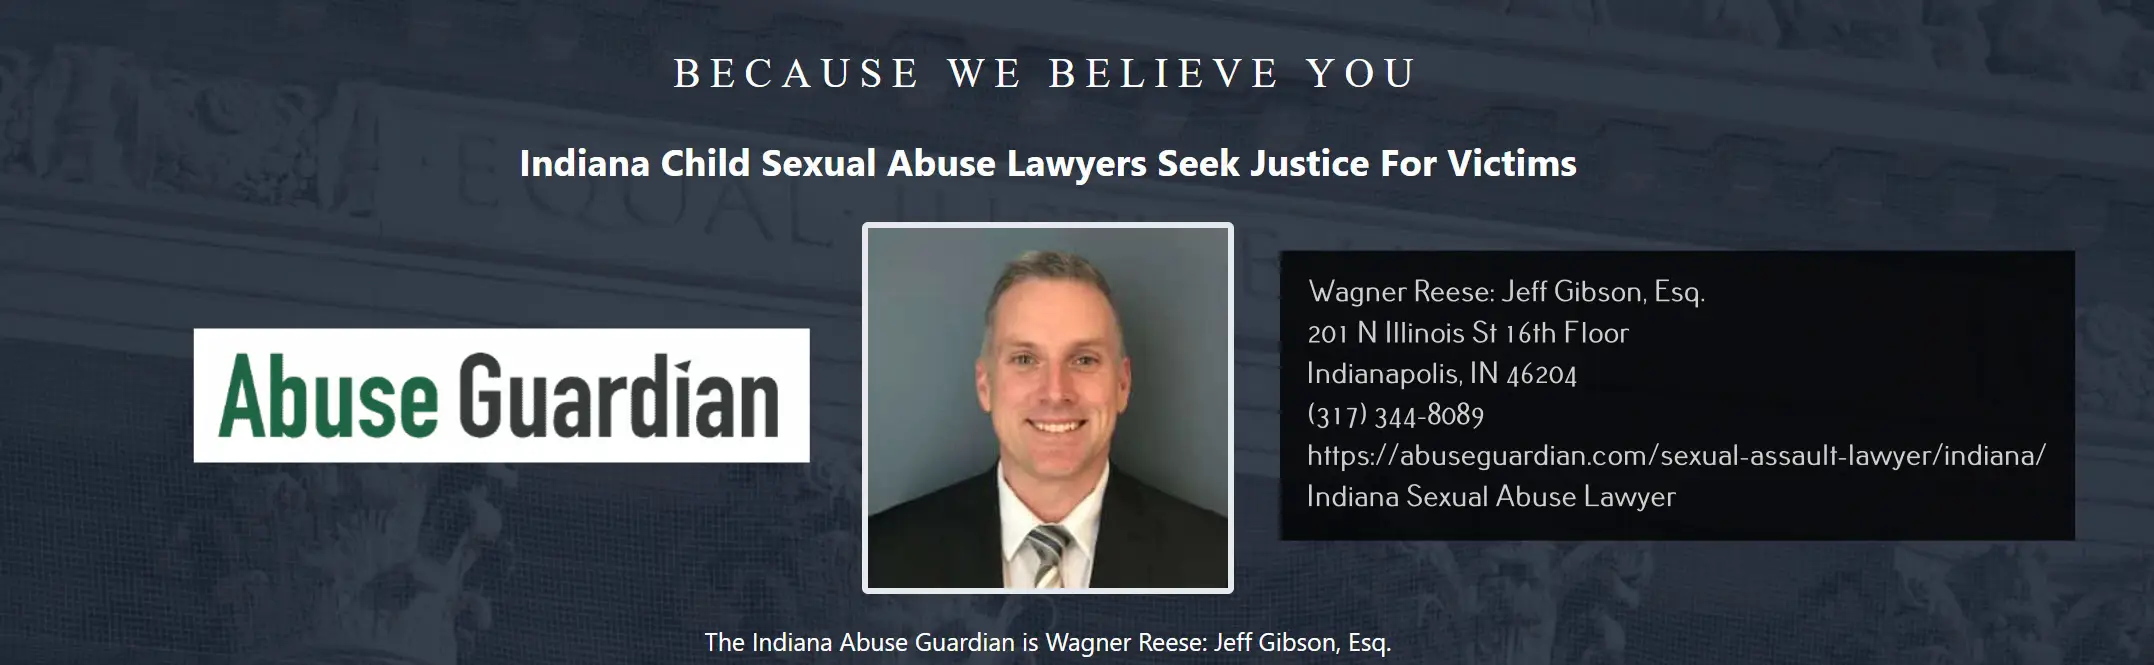 sexual abuse lawyer indianapolis wagner reese jeff gibson, esq.